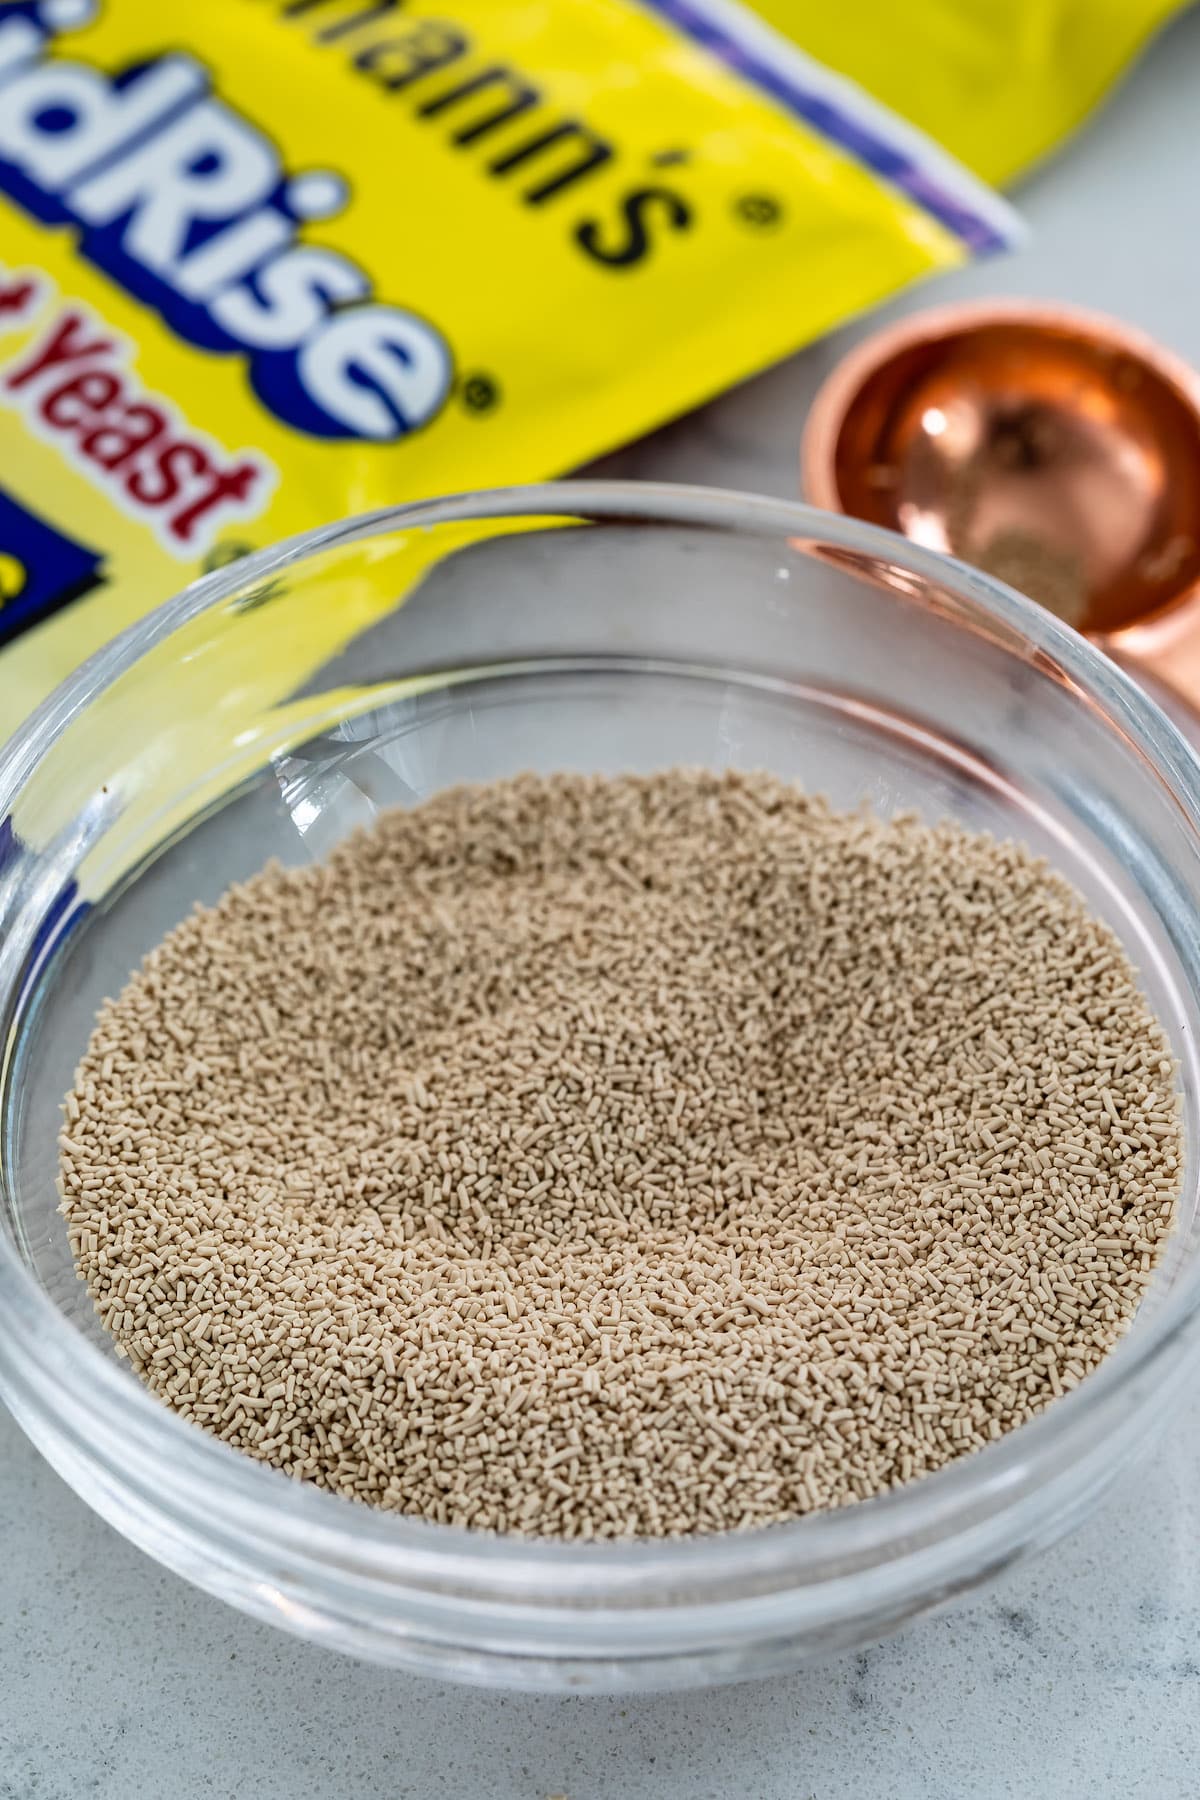 bowl of yeast with package behind